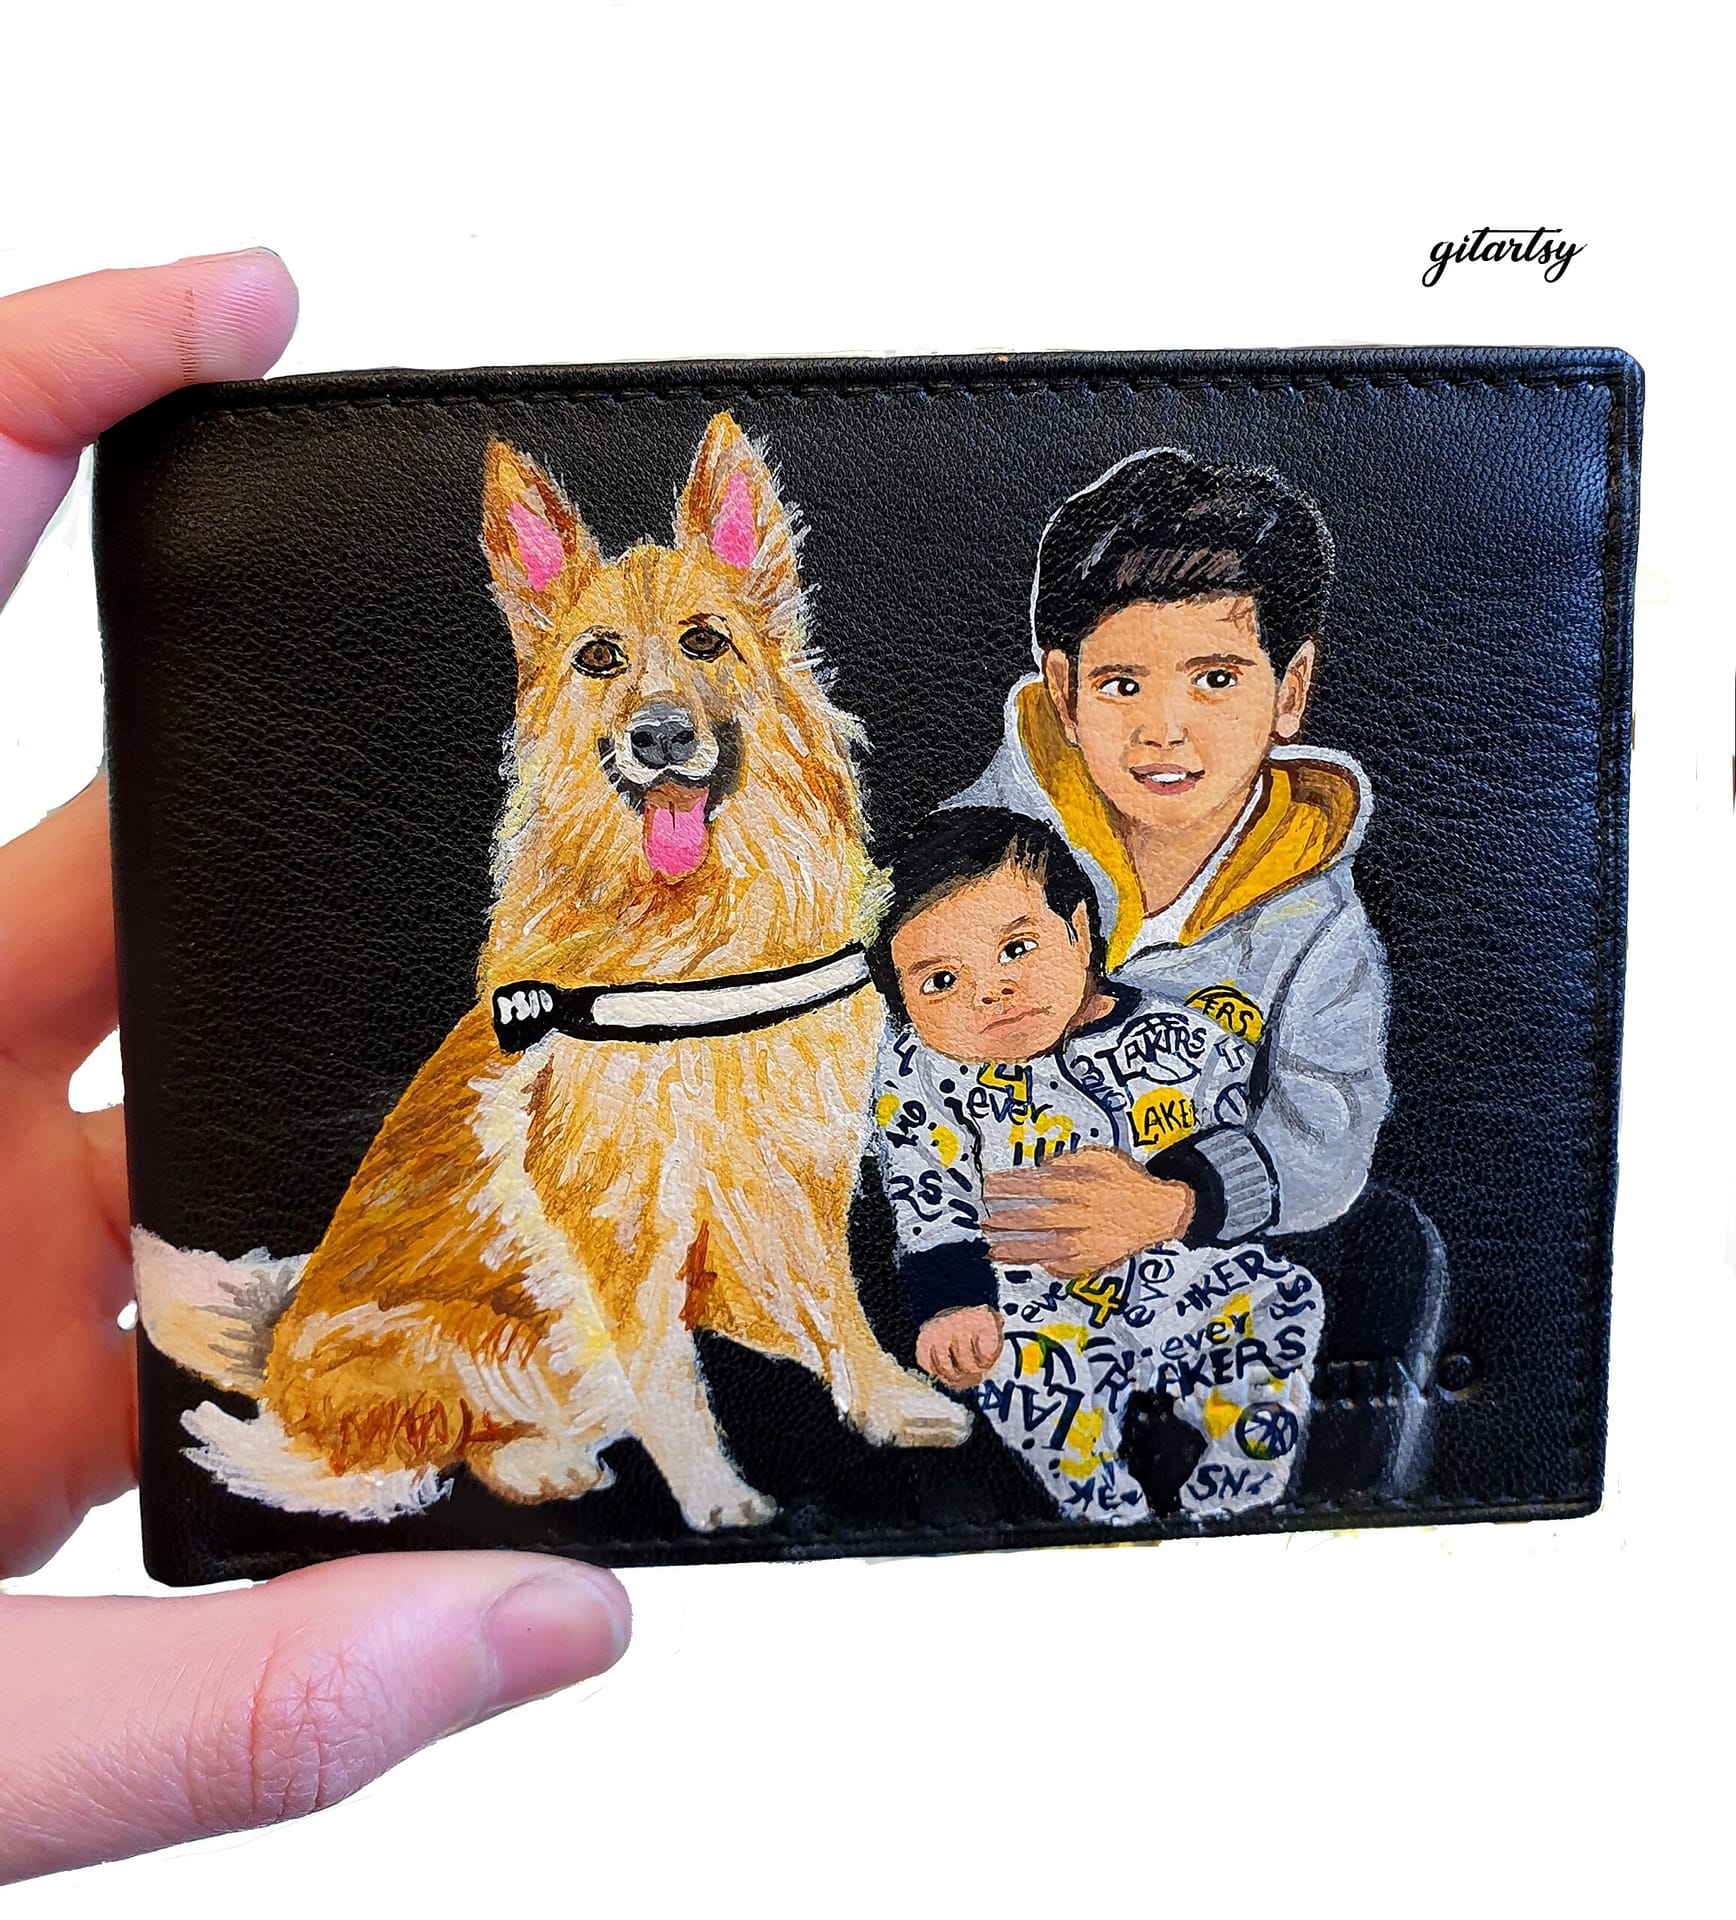 Children - family and German shepherd dog portraits painted on a small leather wallet